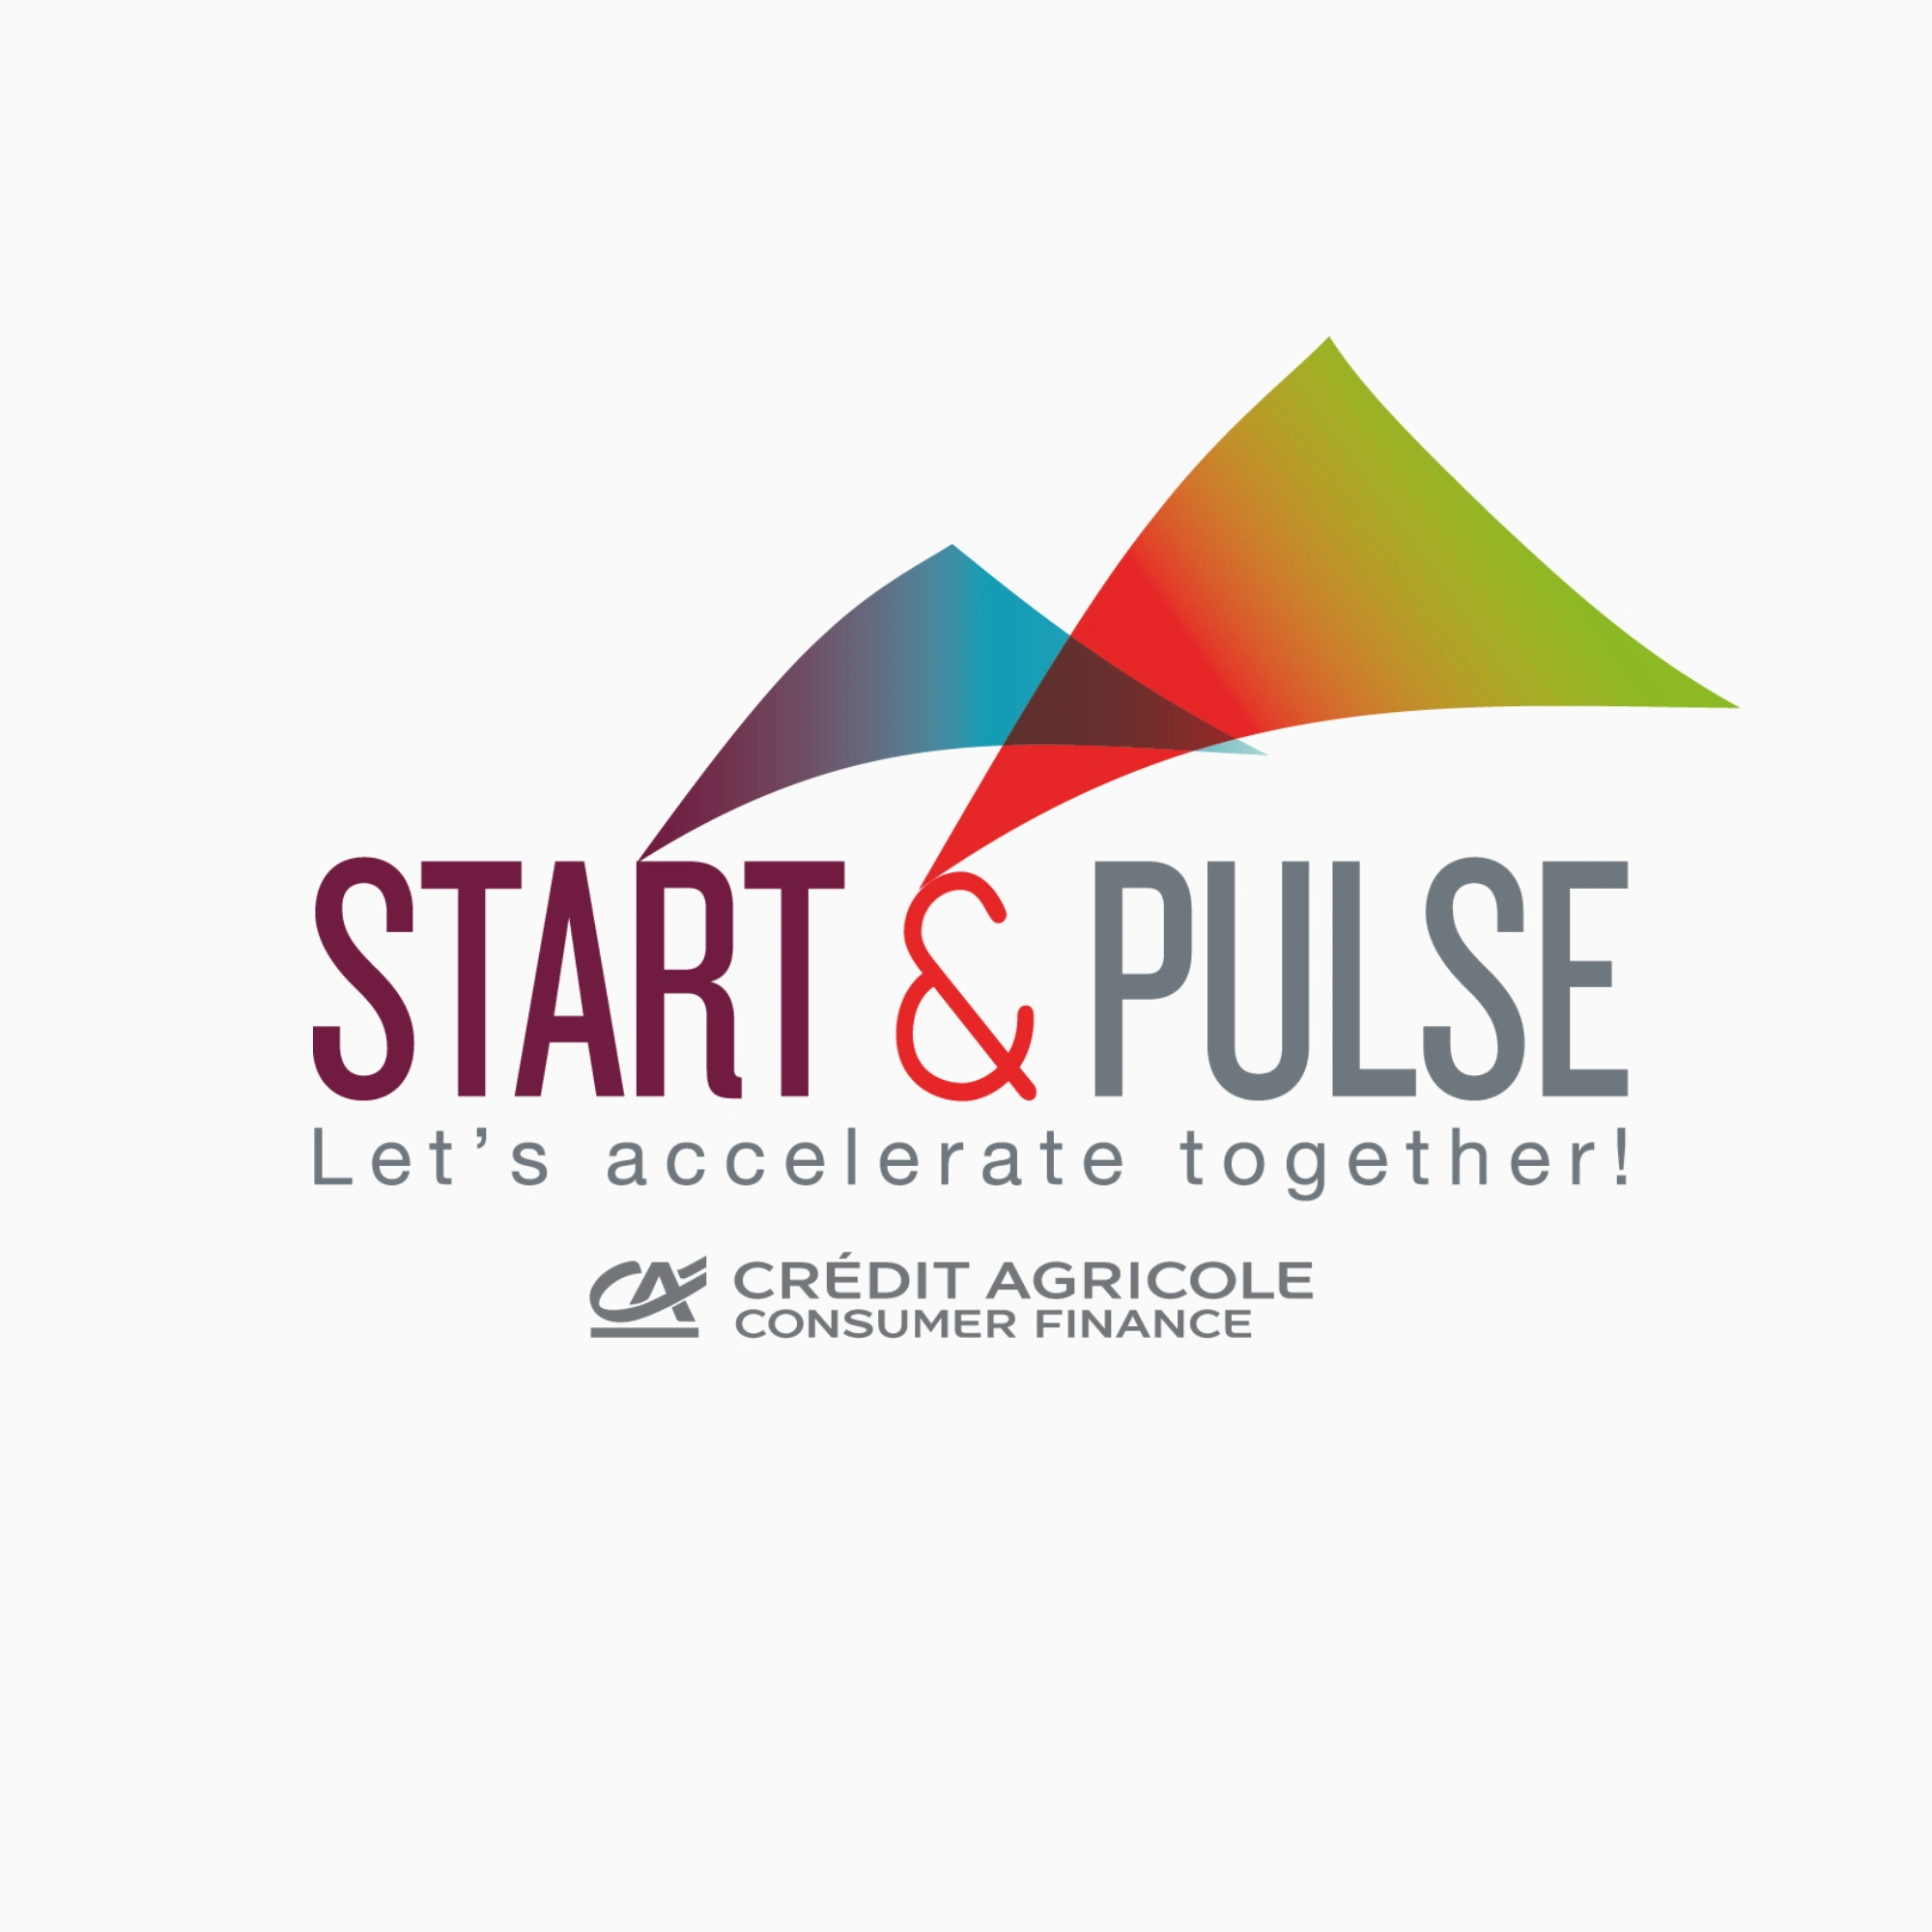 Why we do the Start &amp; Pulse challenge?